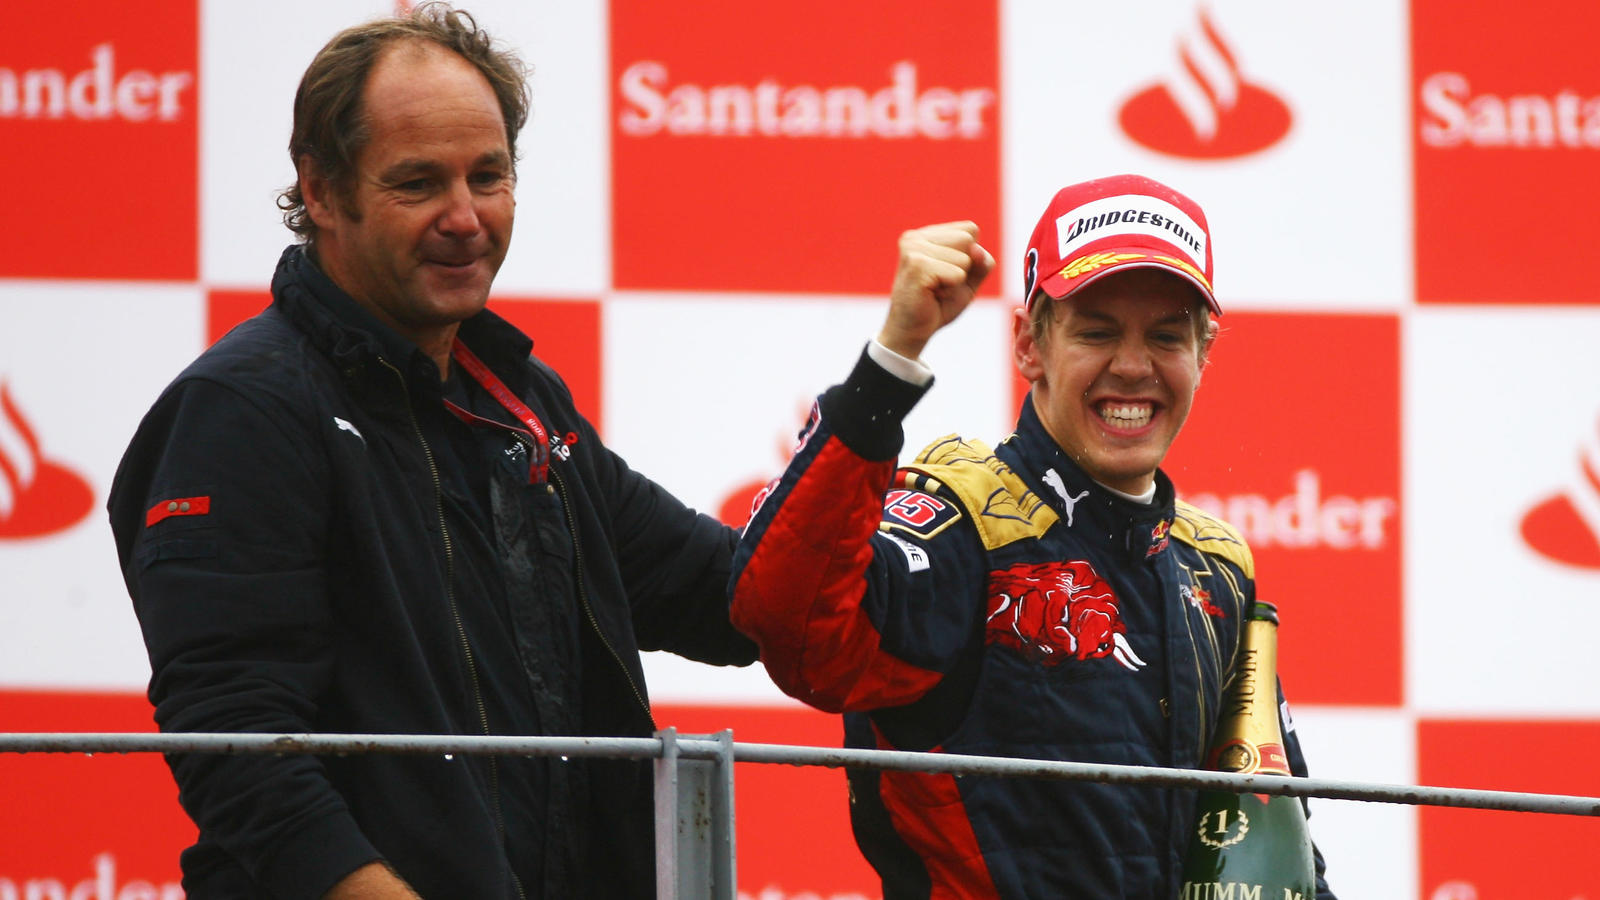 MONZA, ITALY - SEPTEMBER 14:  Sebastian Vettel (R) of Germany and Scuderia Toro Rosso celebrates on the podium with Scuderia Toro Rosso Team Owner Gerhard Berger after winning the Italian Formula One Grand Prix at the Autodromo Nazionale di Monza on 